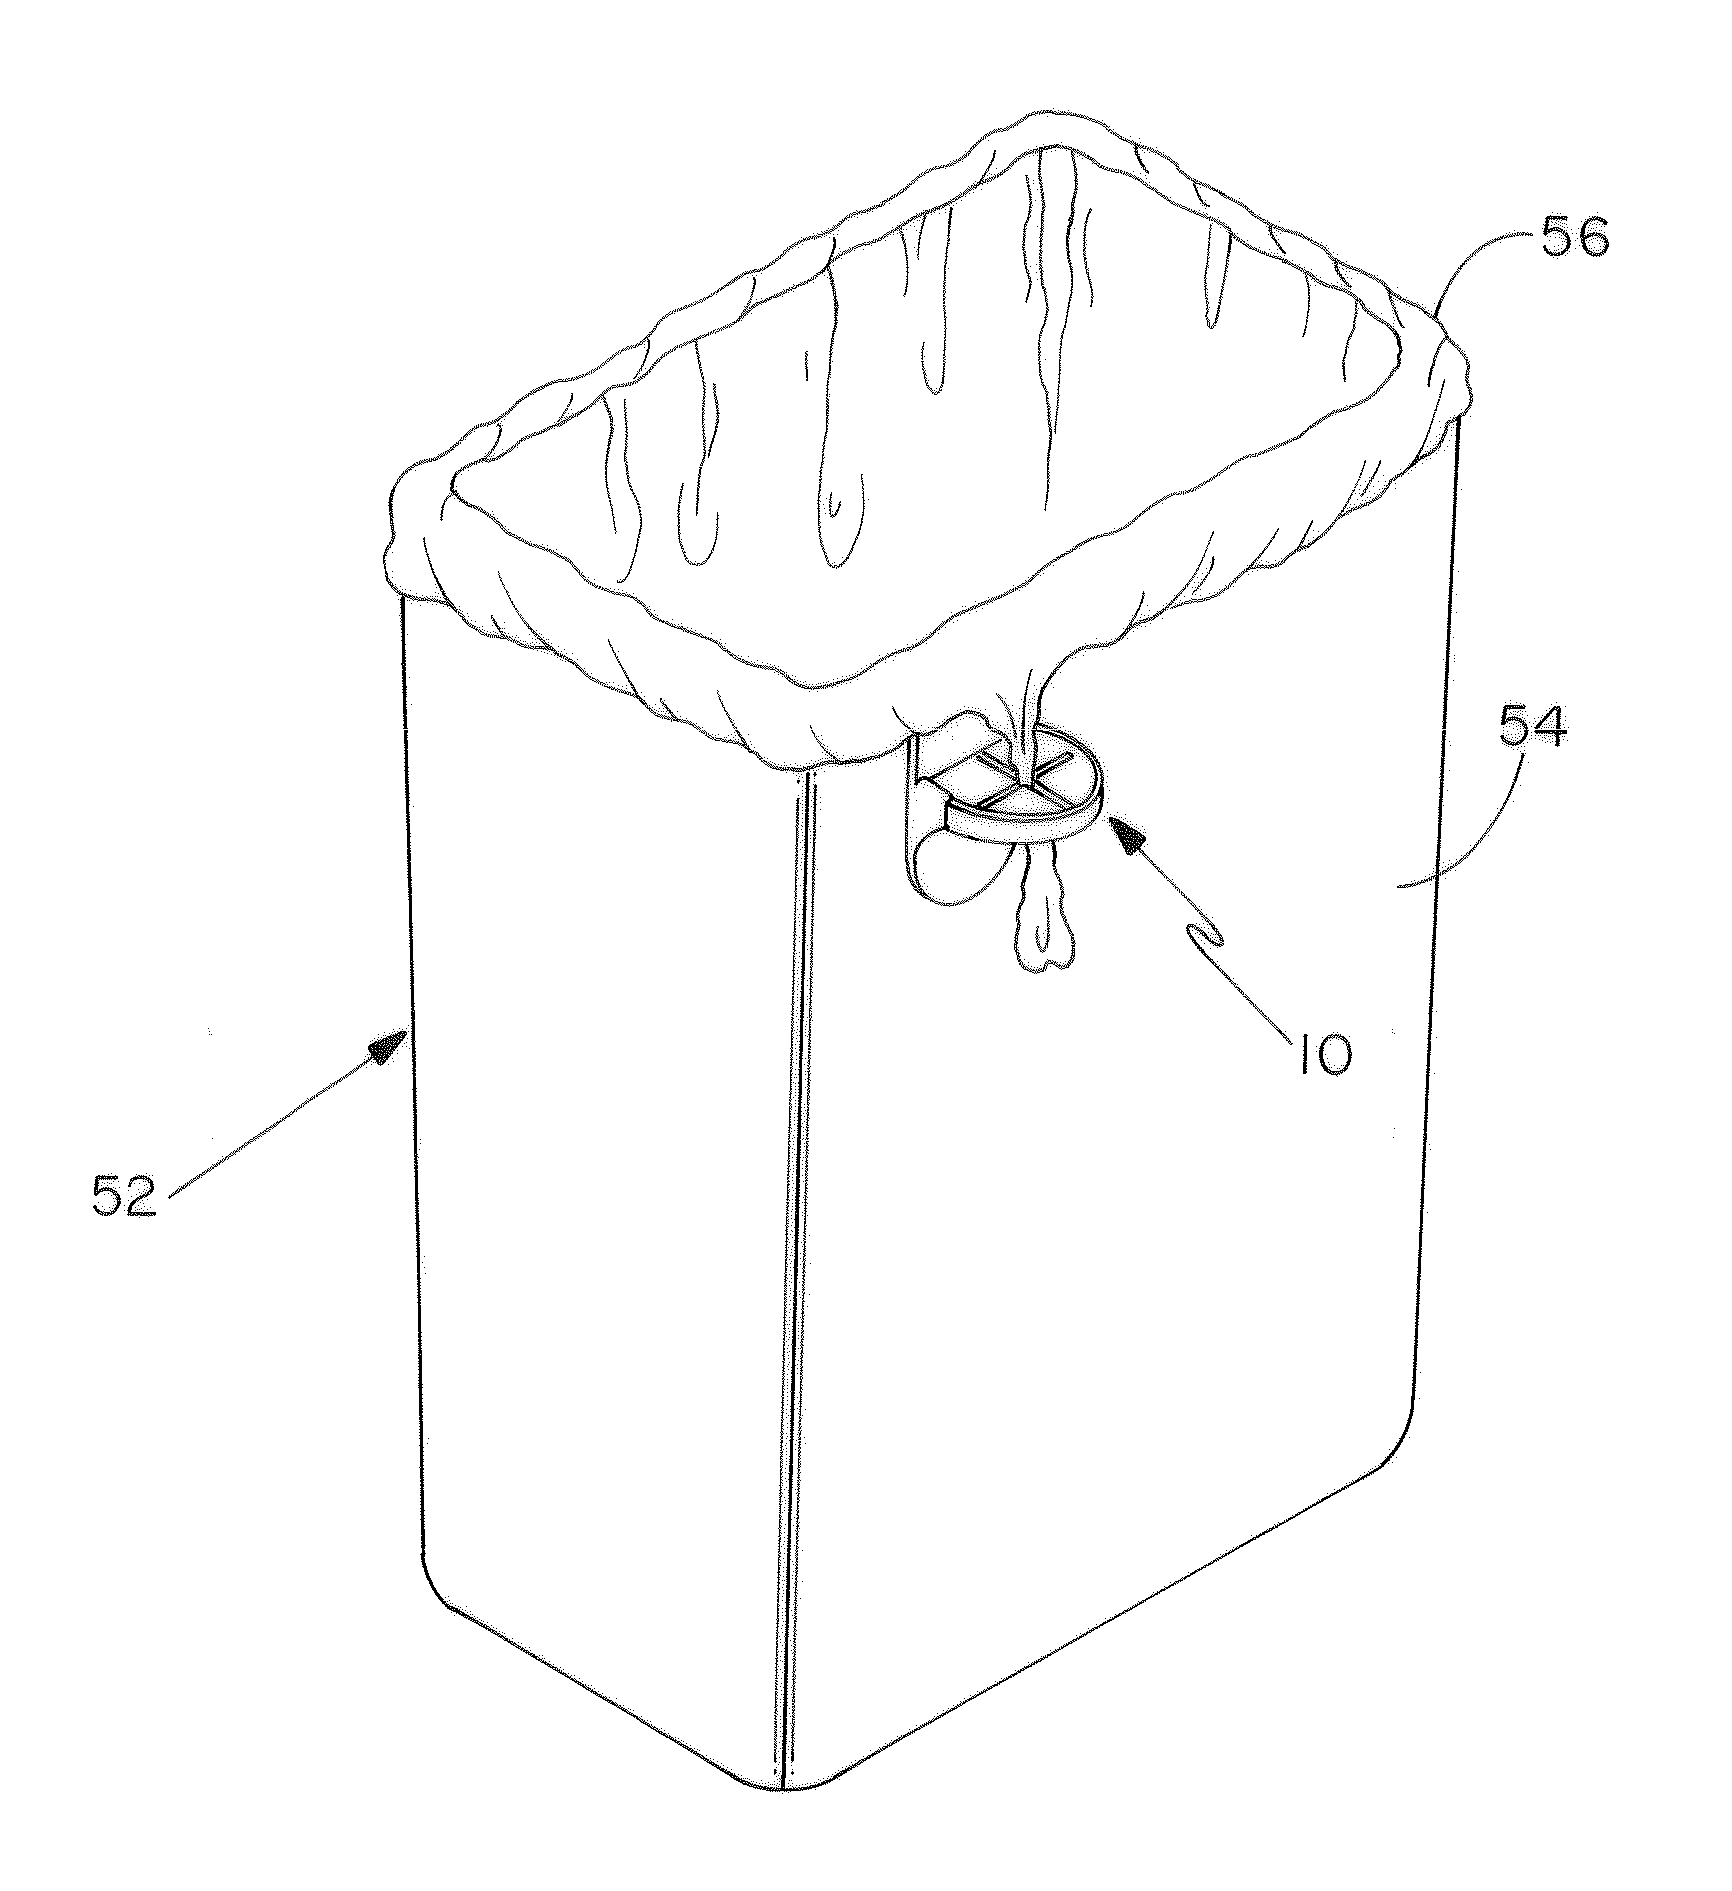 Apparatus for securing a bag with scented retaining element